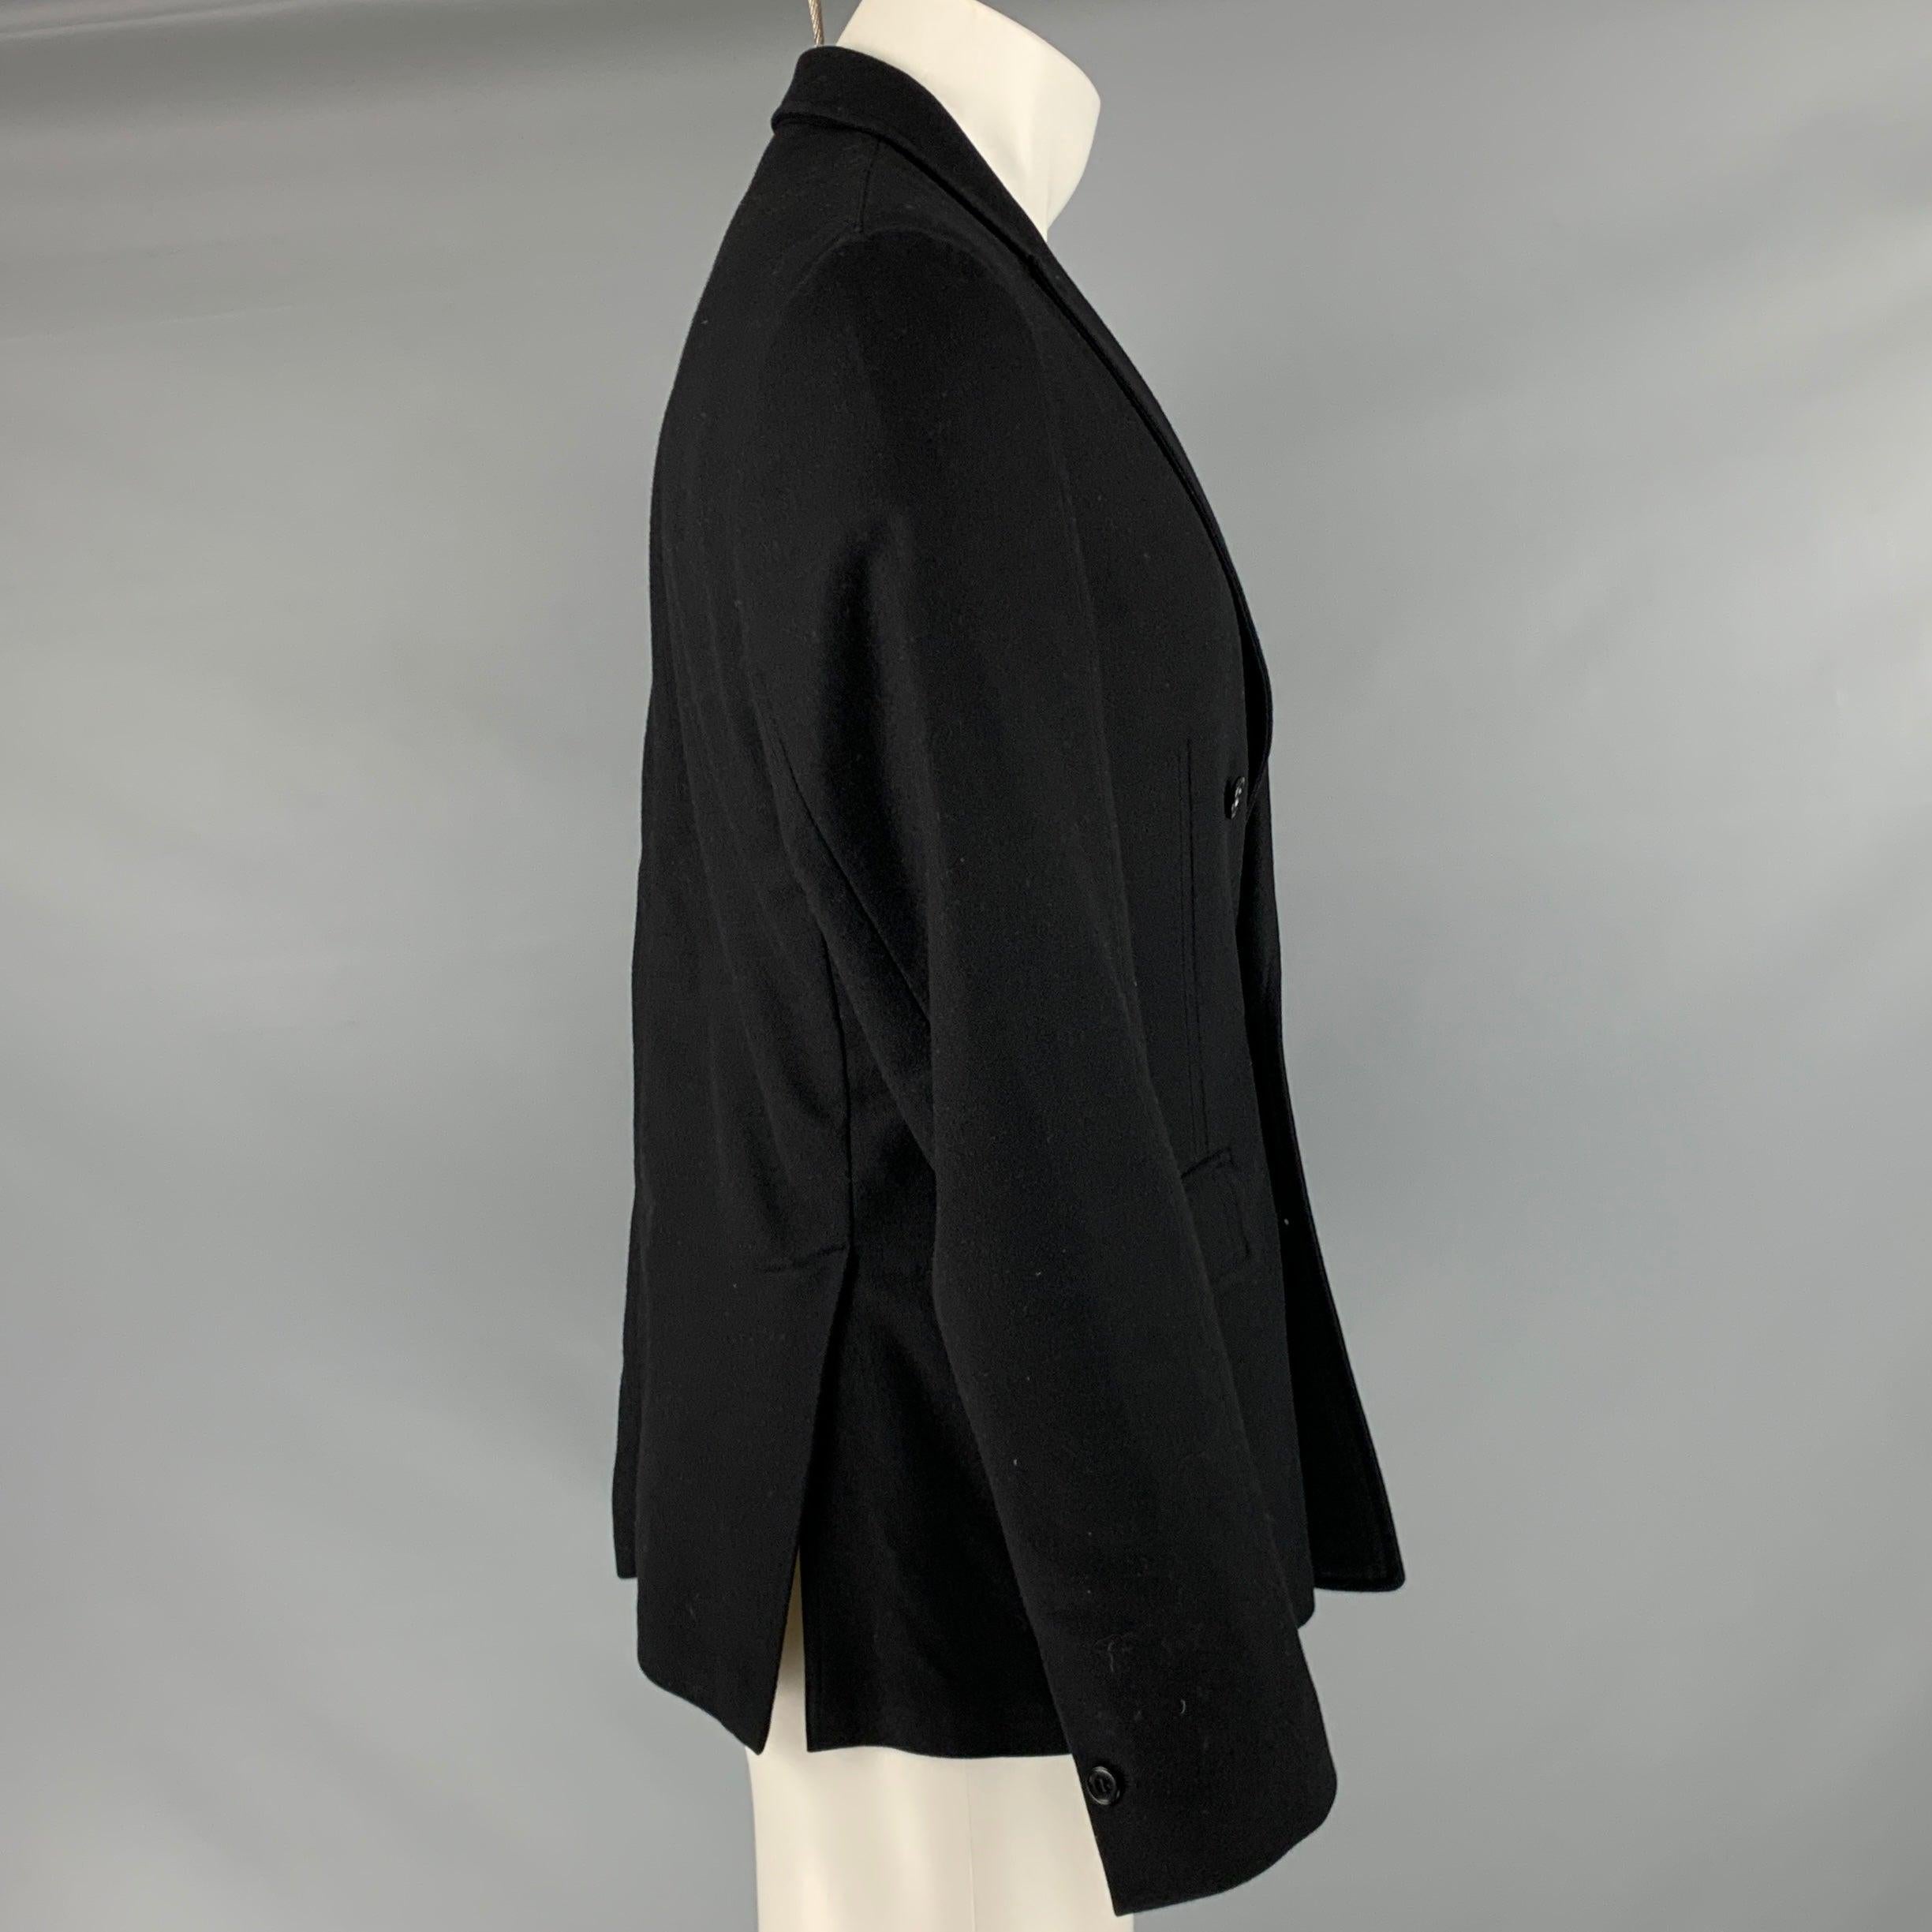 JOHN VARVATOS jacket
in a black virgin wool blend fabric featuring a double-breasted style, peak lapel, and double button closure. Made in Italy.Good Pre-Owned Condition.
Moderate signs of wear and marks under arms. 

Marked:   48 

Measurements: 
